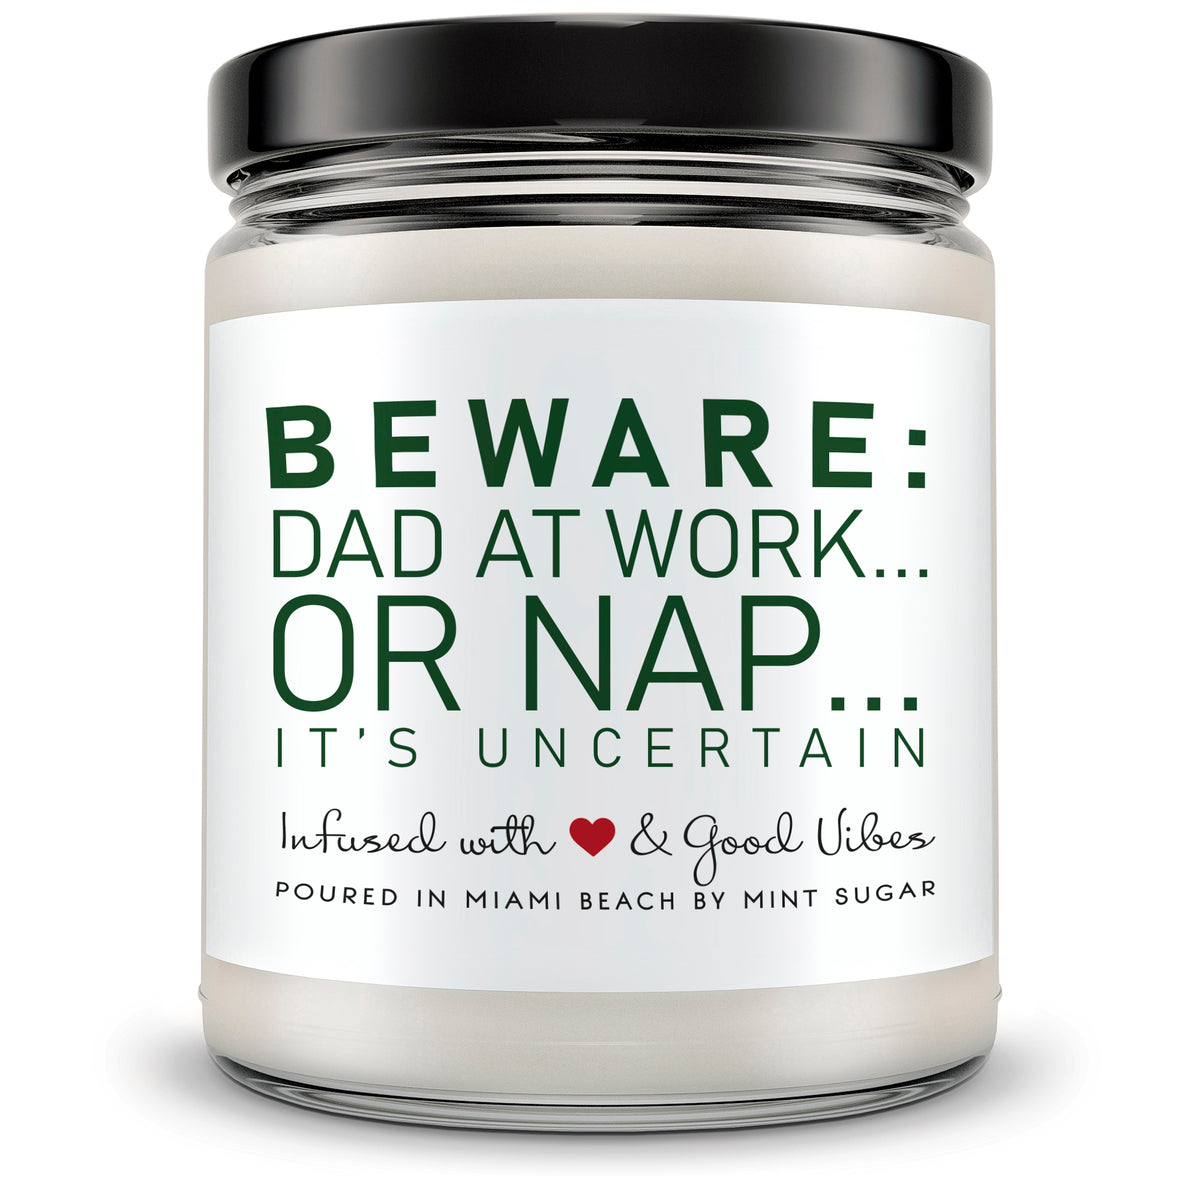 Beware Dad at Work...Or Nap...It’s Uncertain - Mint Sugar Candle